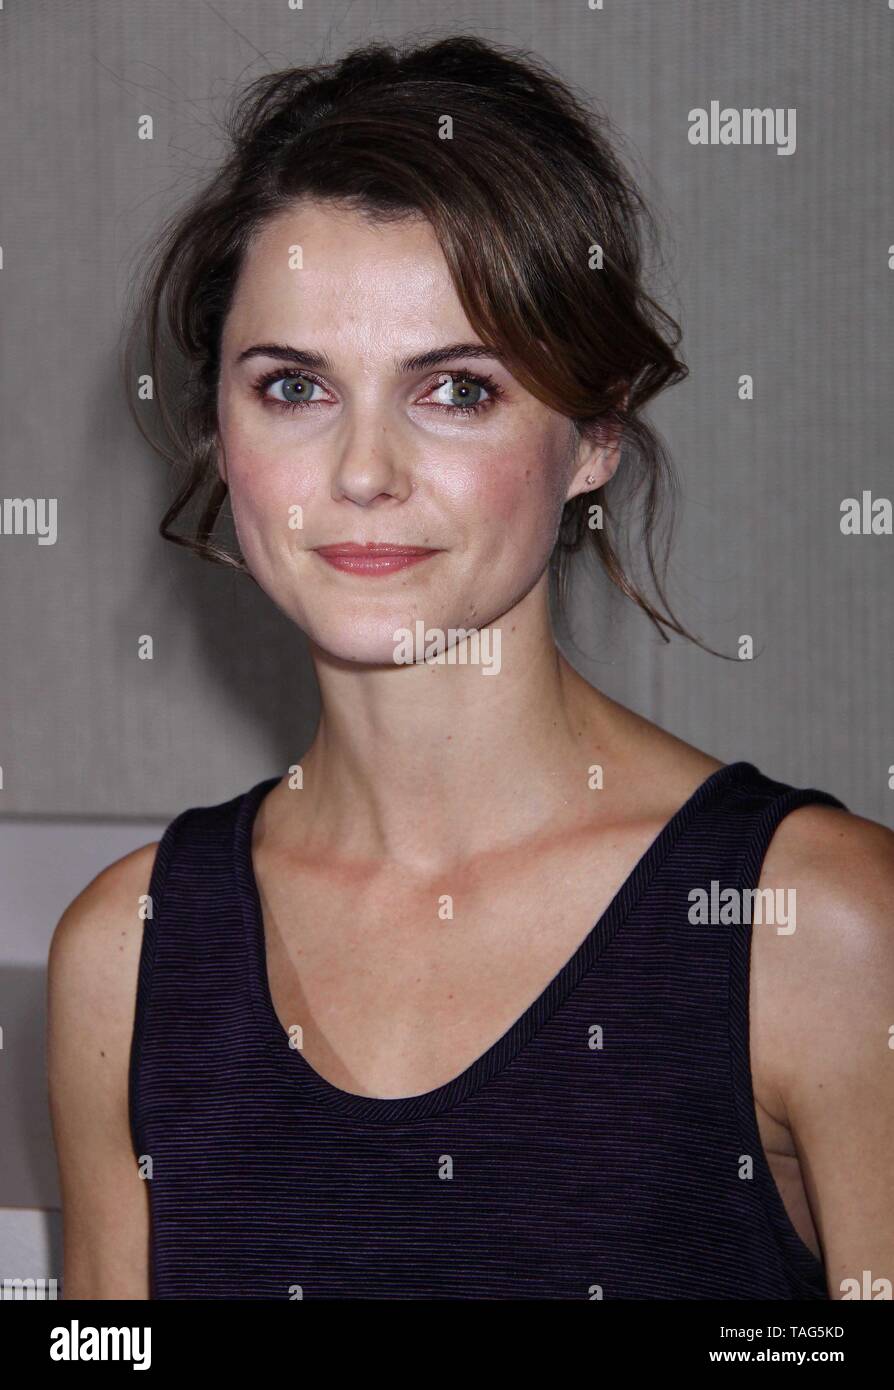 Keri russell actress hi-res stock photography and images - Alamy